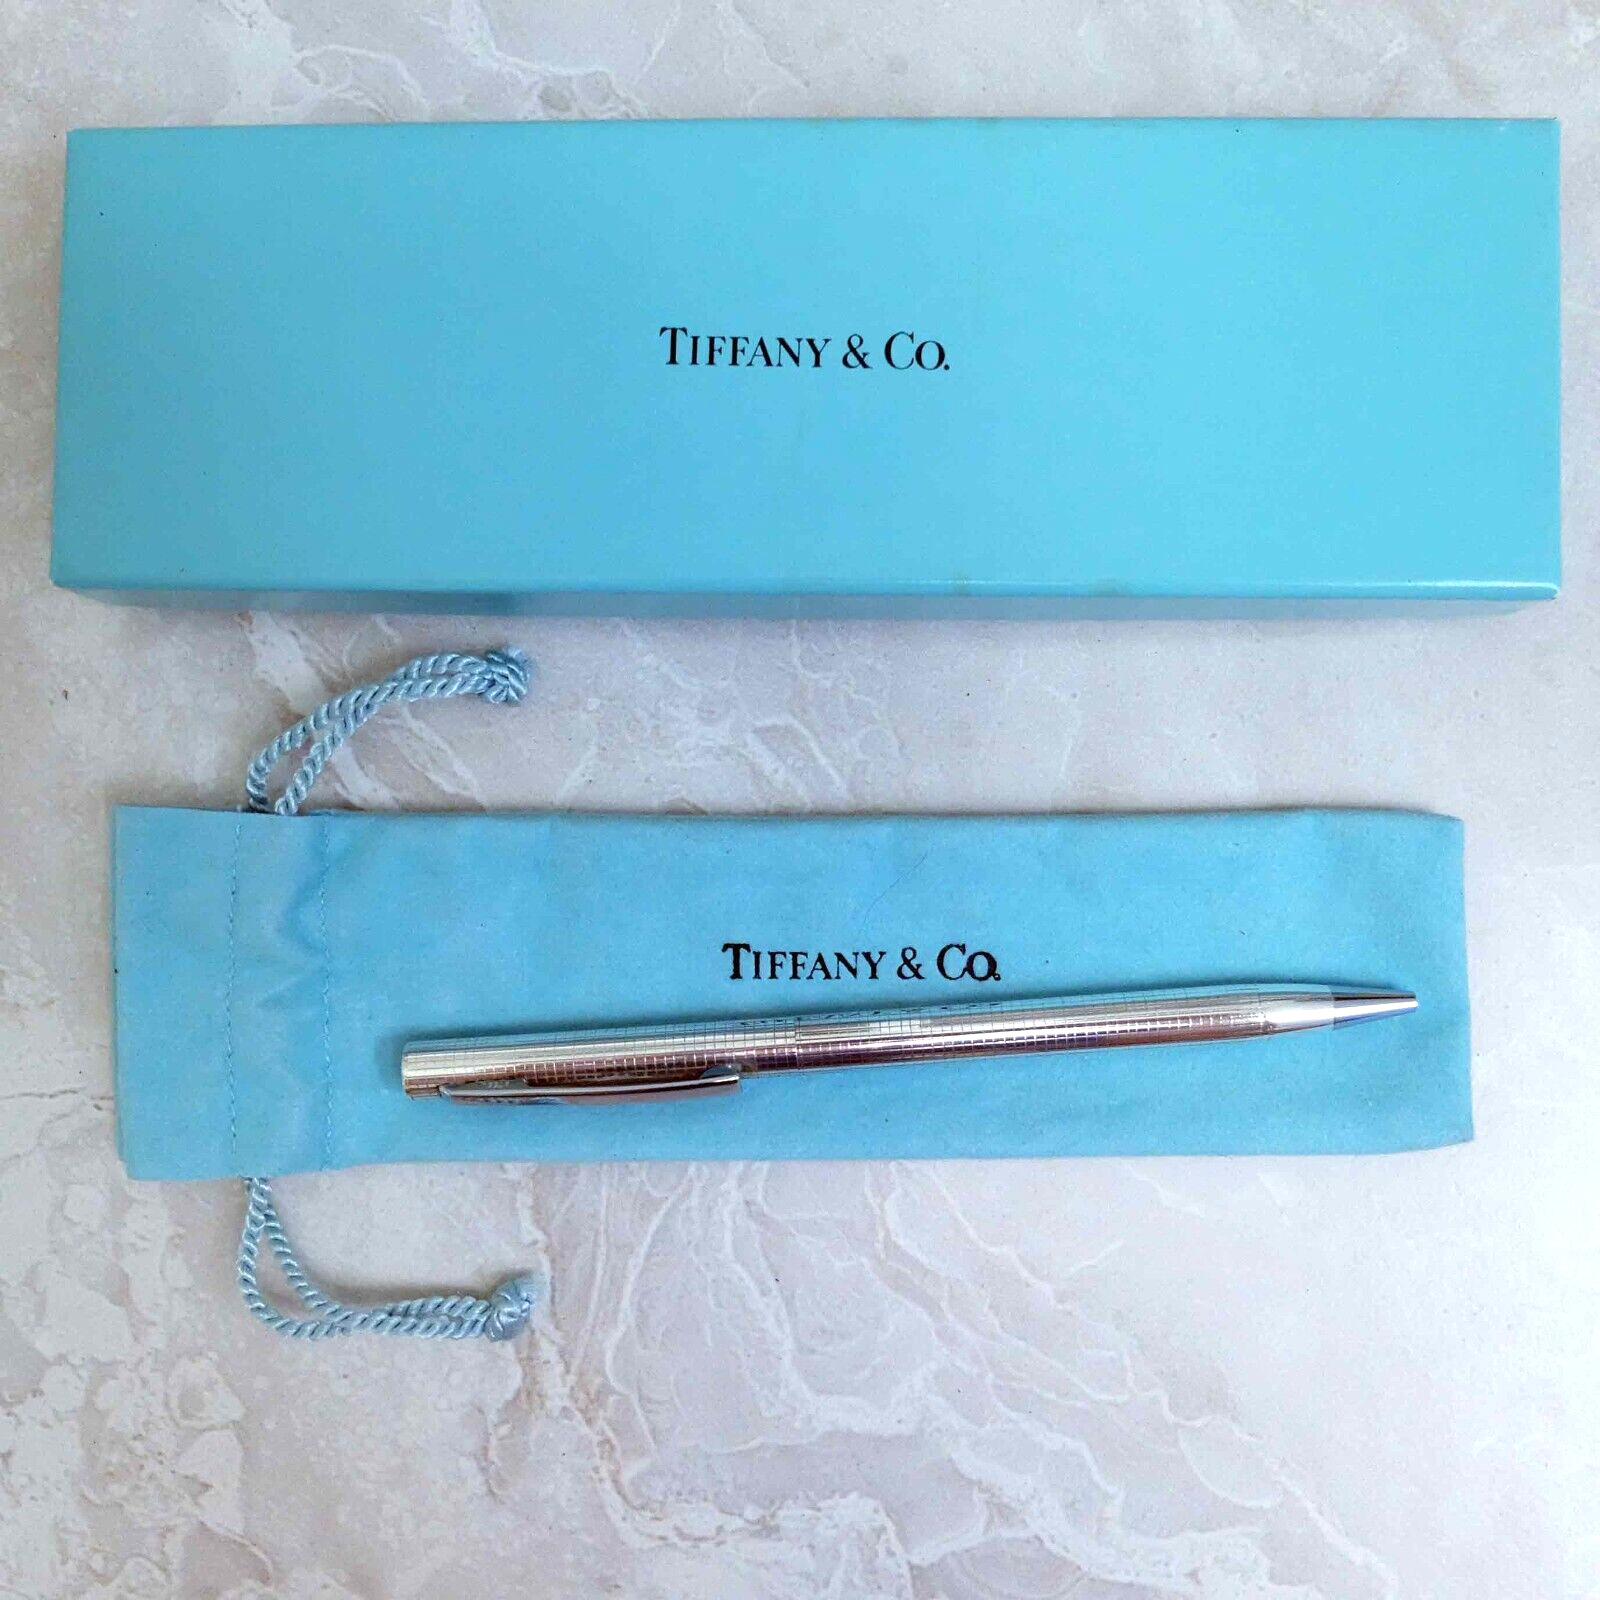 Tiffany & Co Sterling Silver Ballpoint Pen with Original Pouch & Box